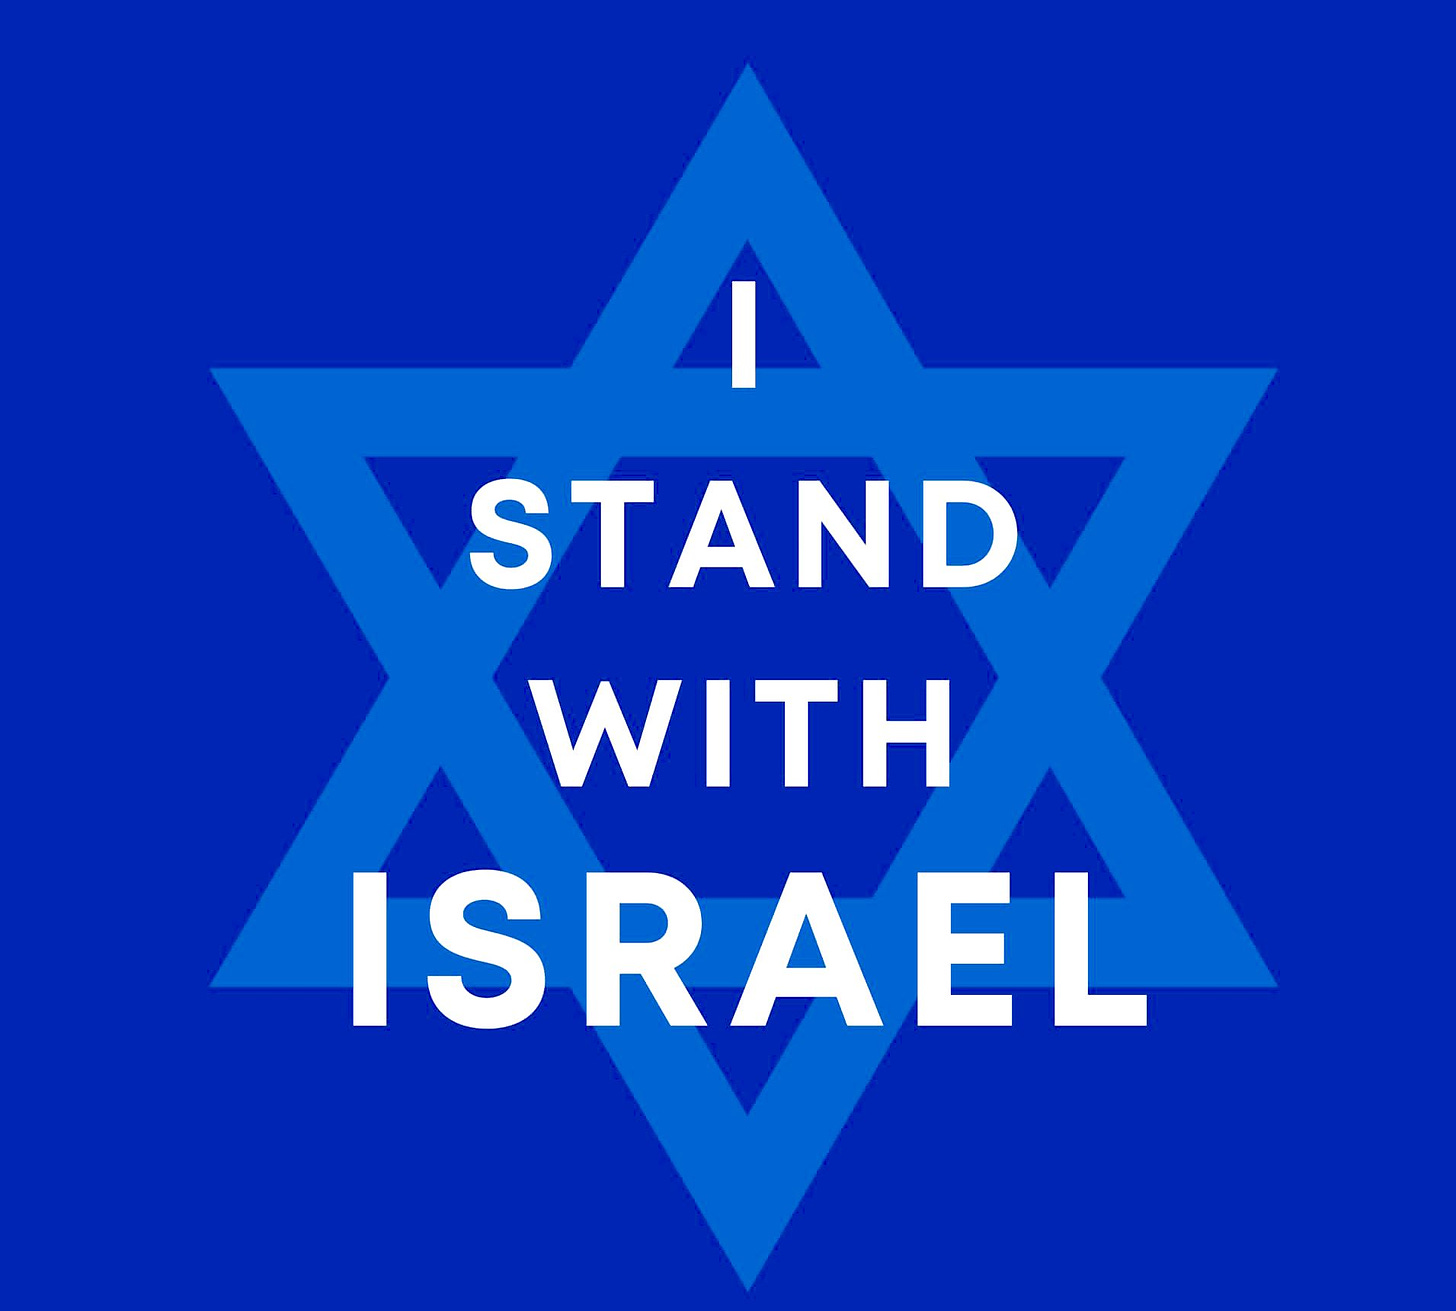 Liz Truss on X: "The murderous attack by Hamas against the Israeli people  is appalling. Israel has the right to defend itself and its citizens from  these evil terrorists. I stand with